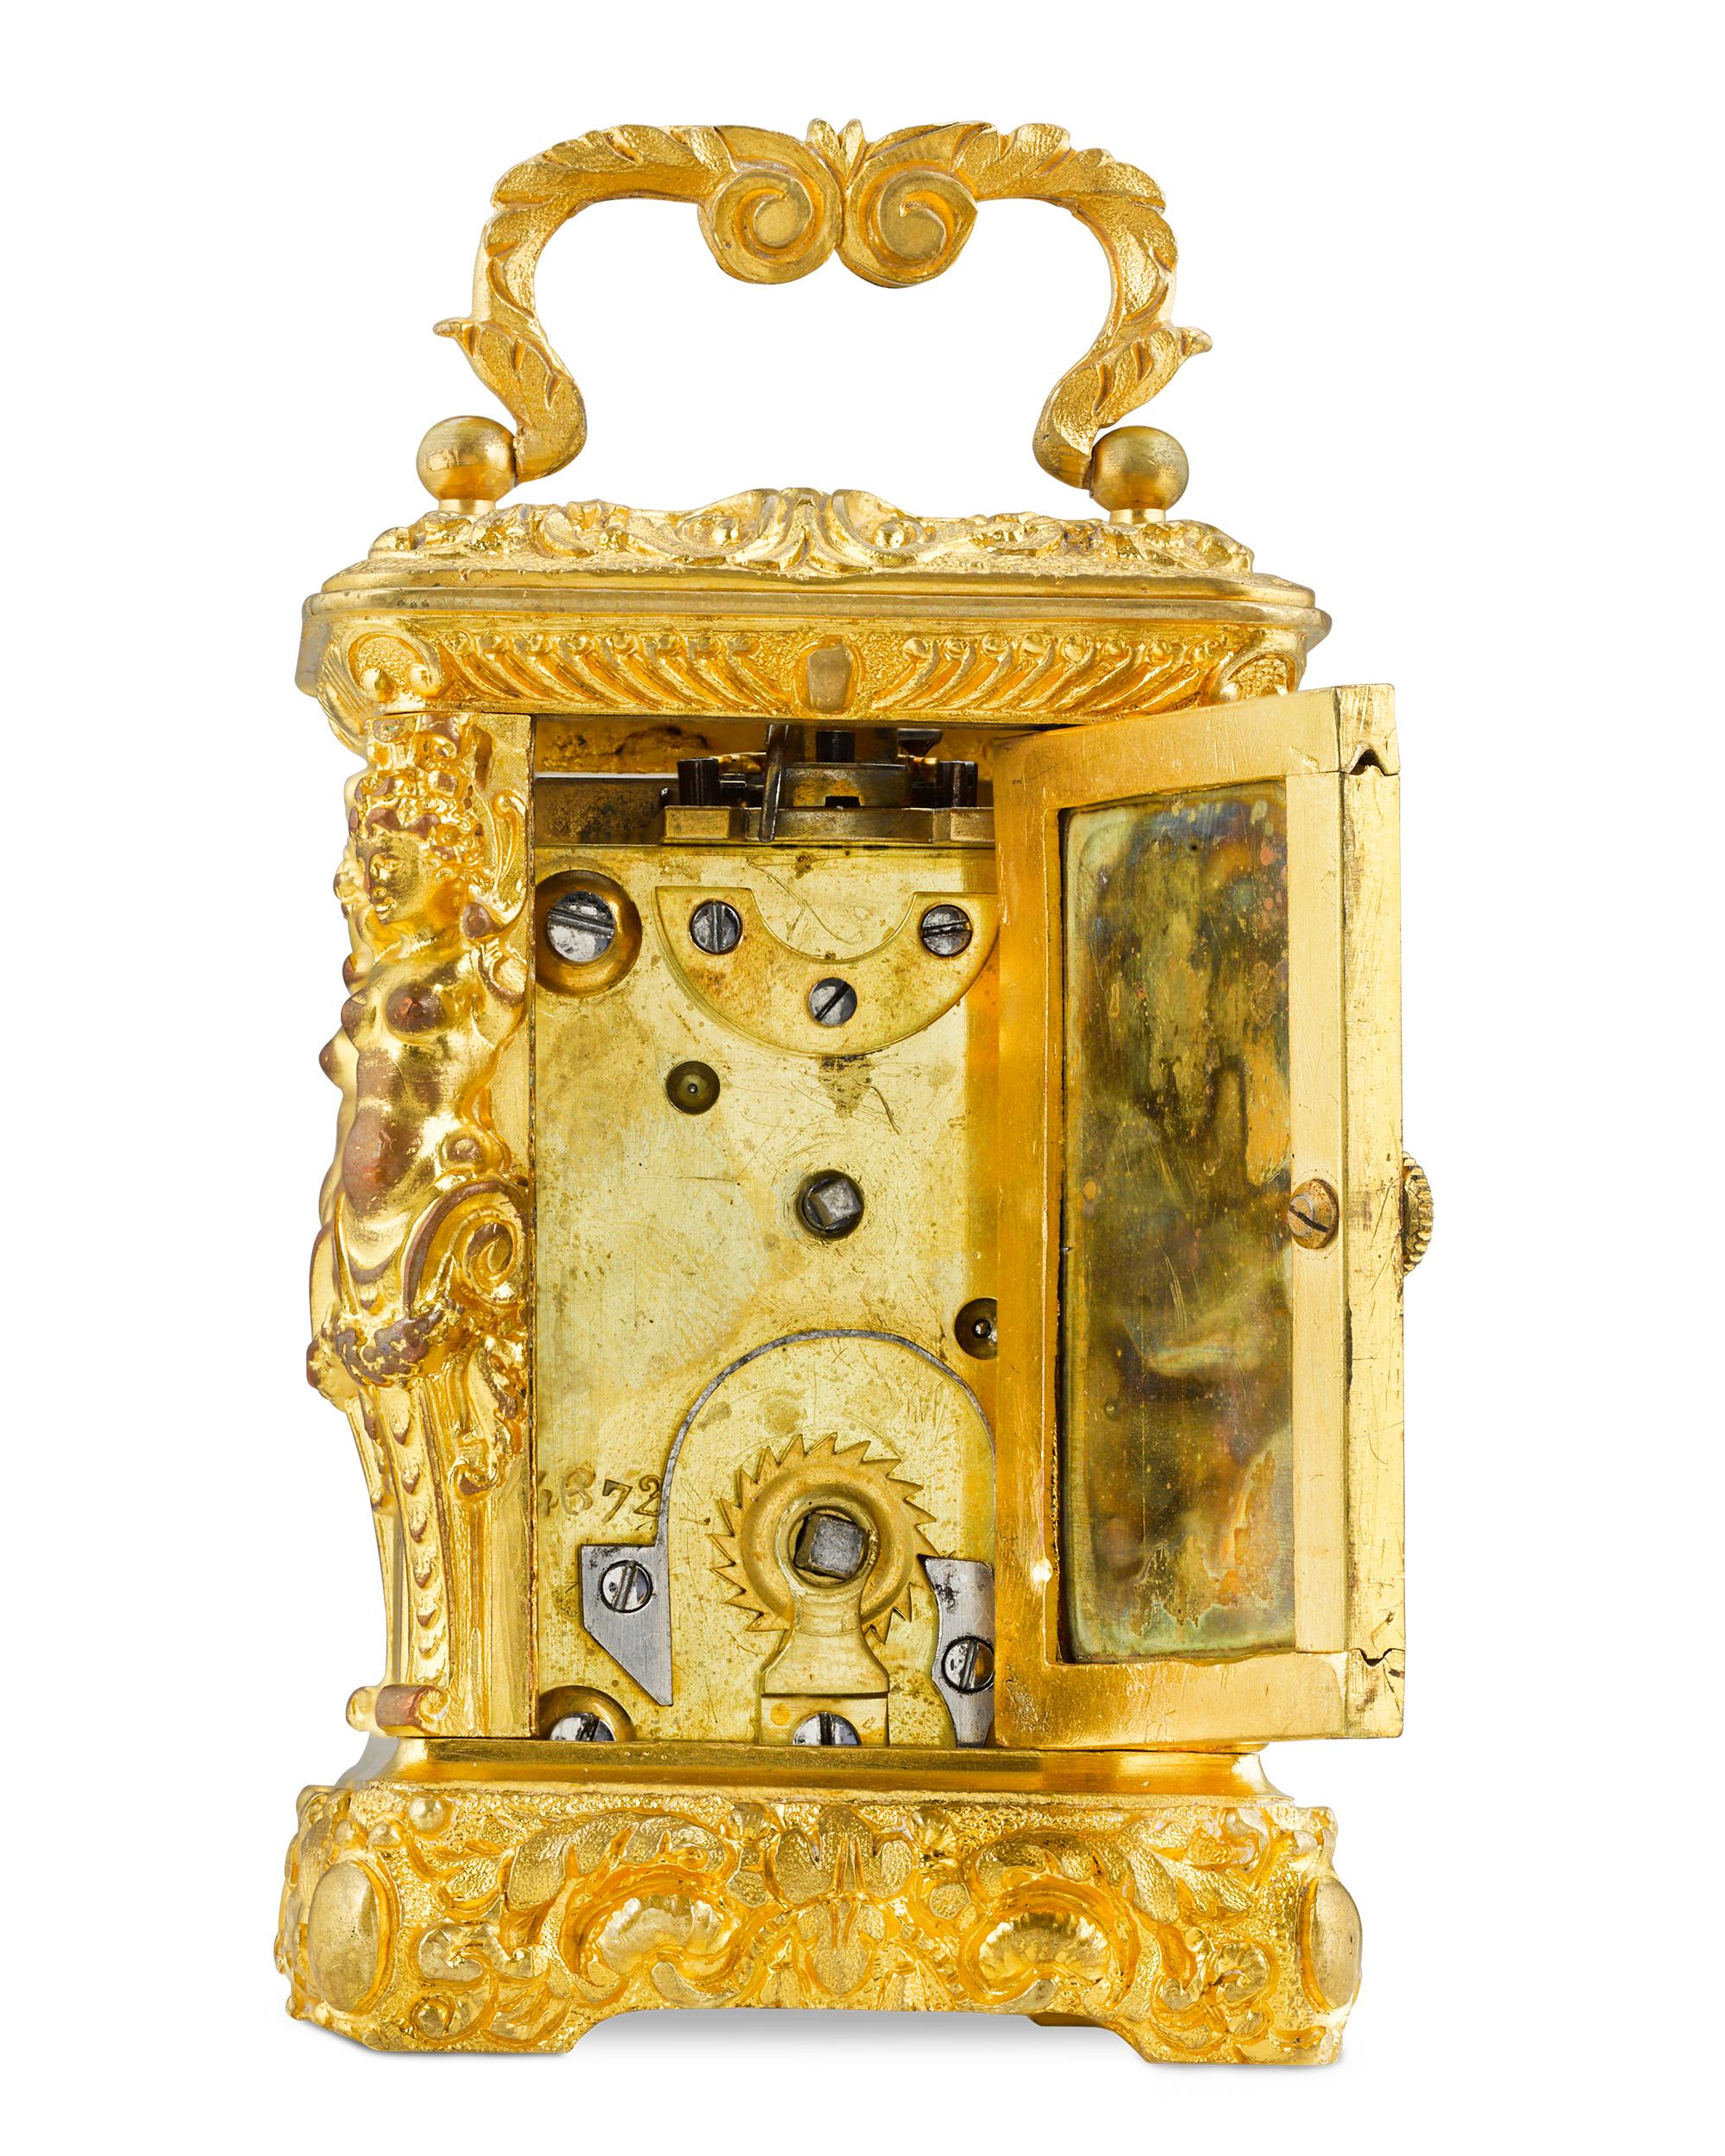 This charming French carriage clock is made in the 